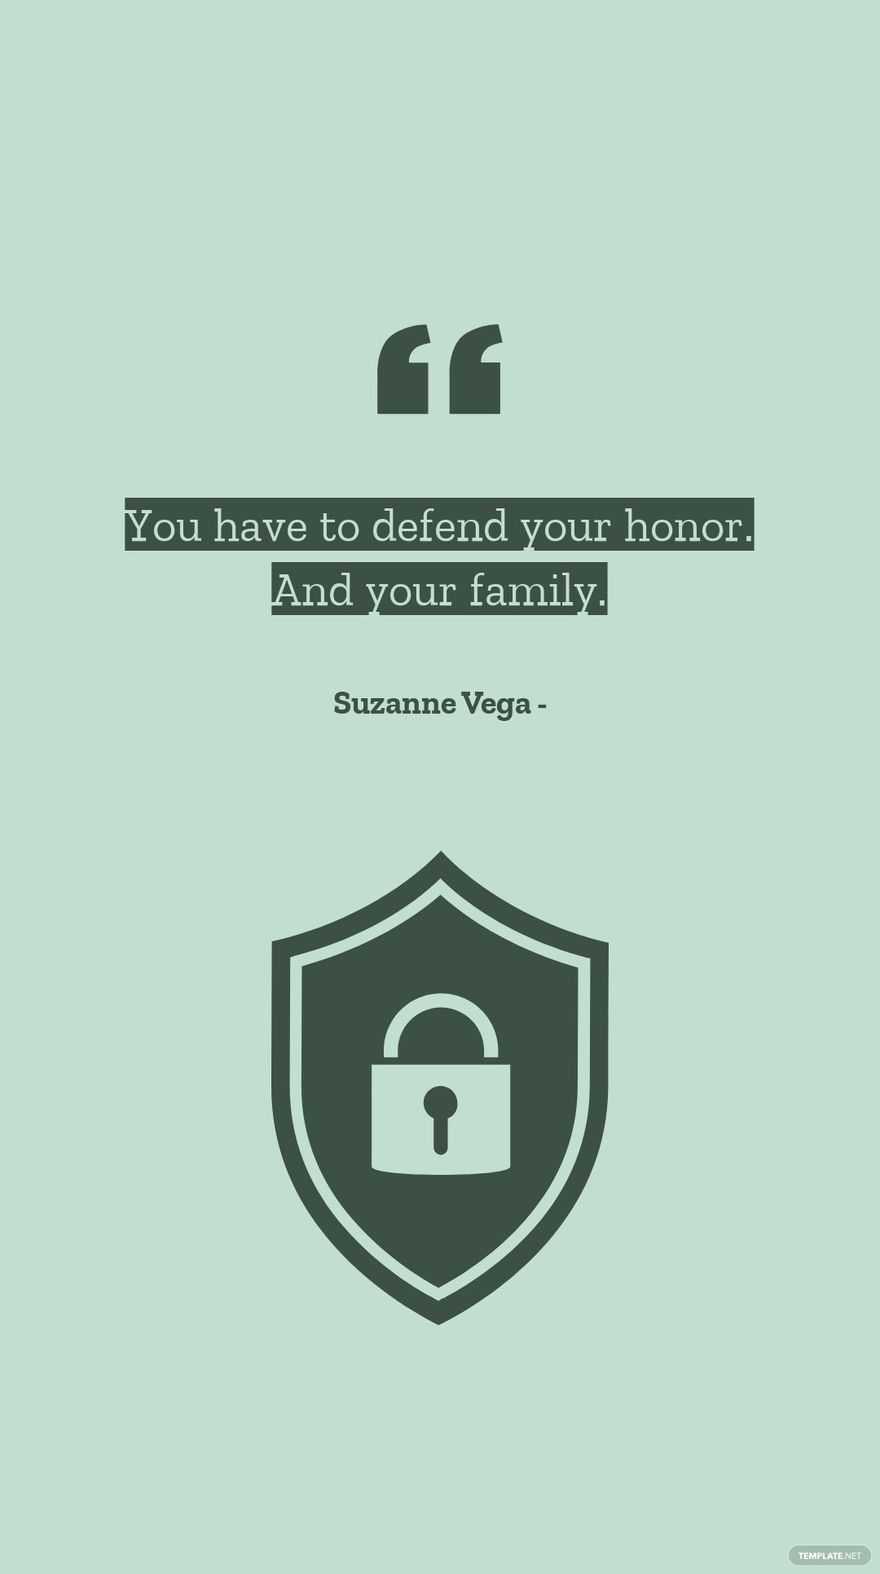 Suzanne Vega - You have to defend your honor. And your family.